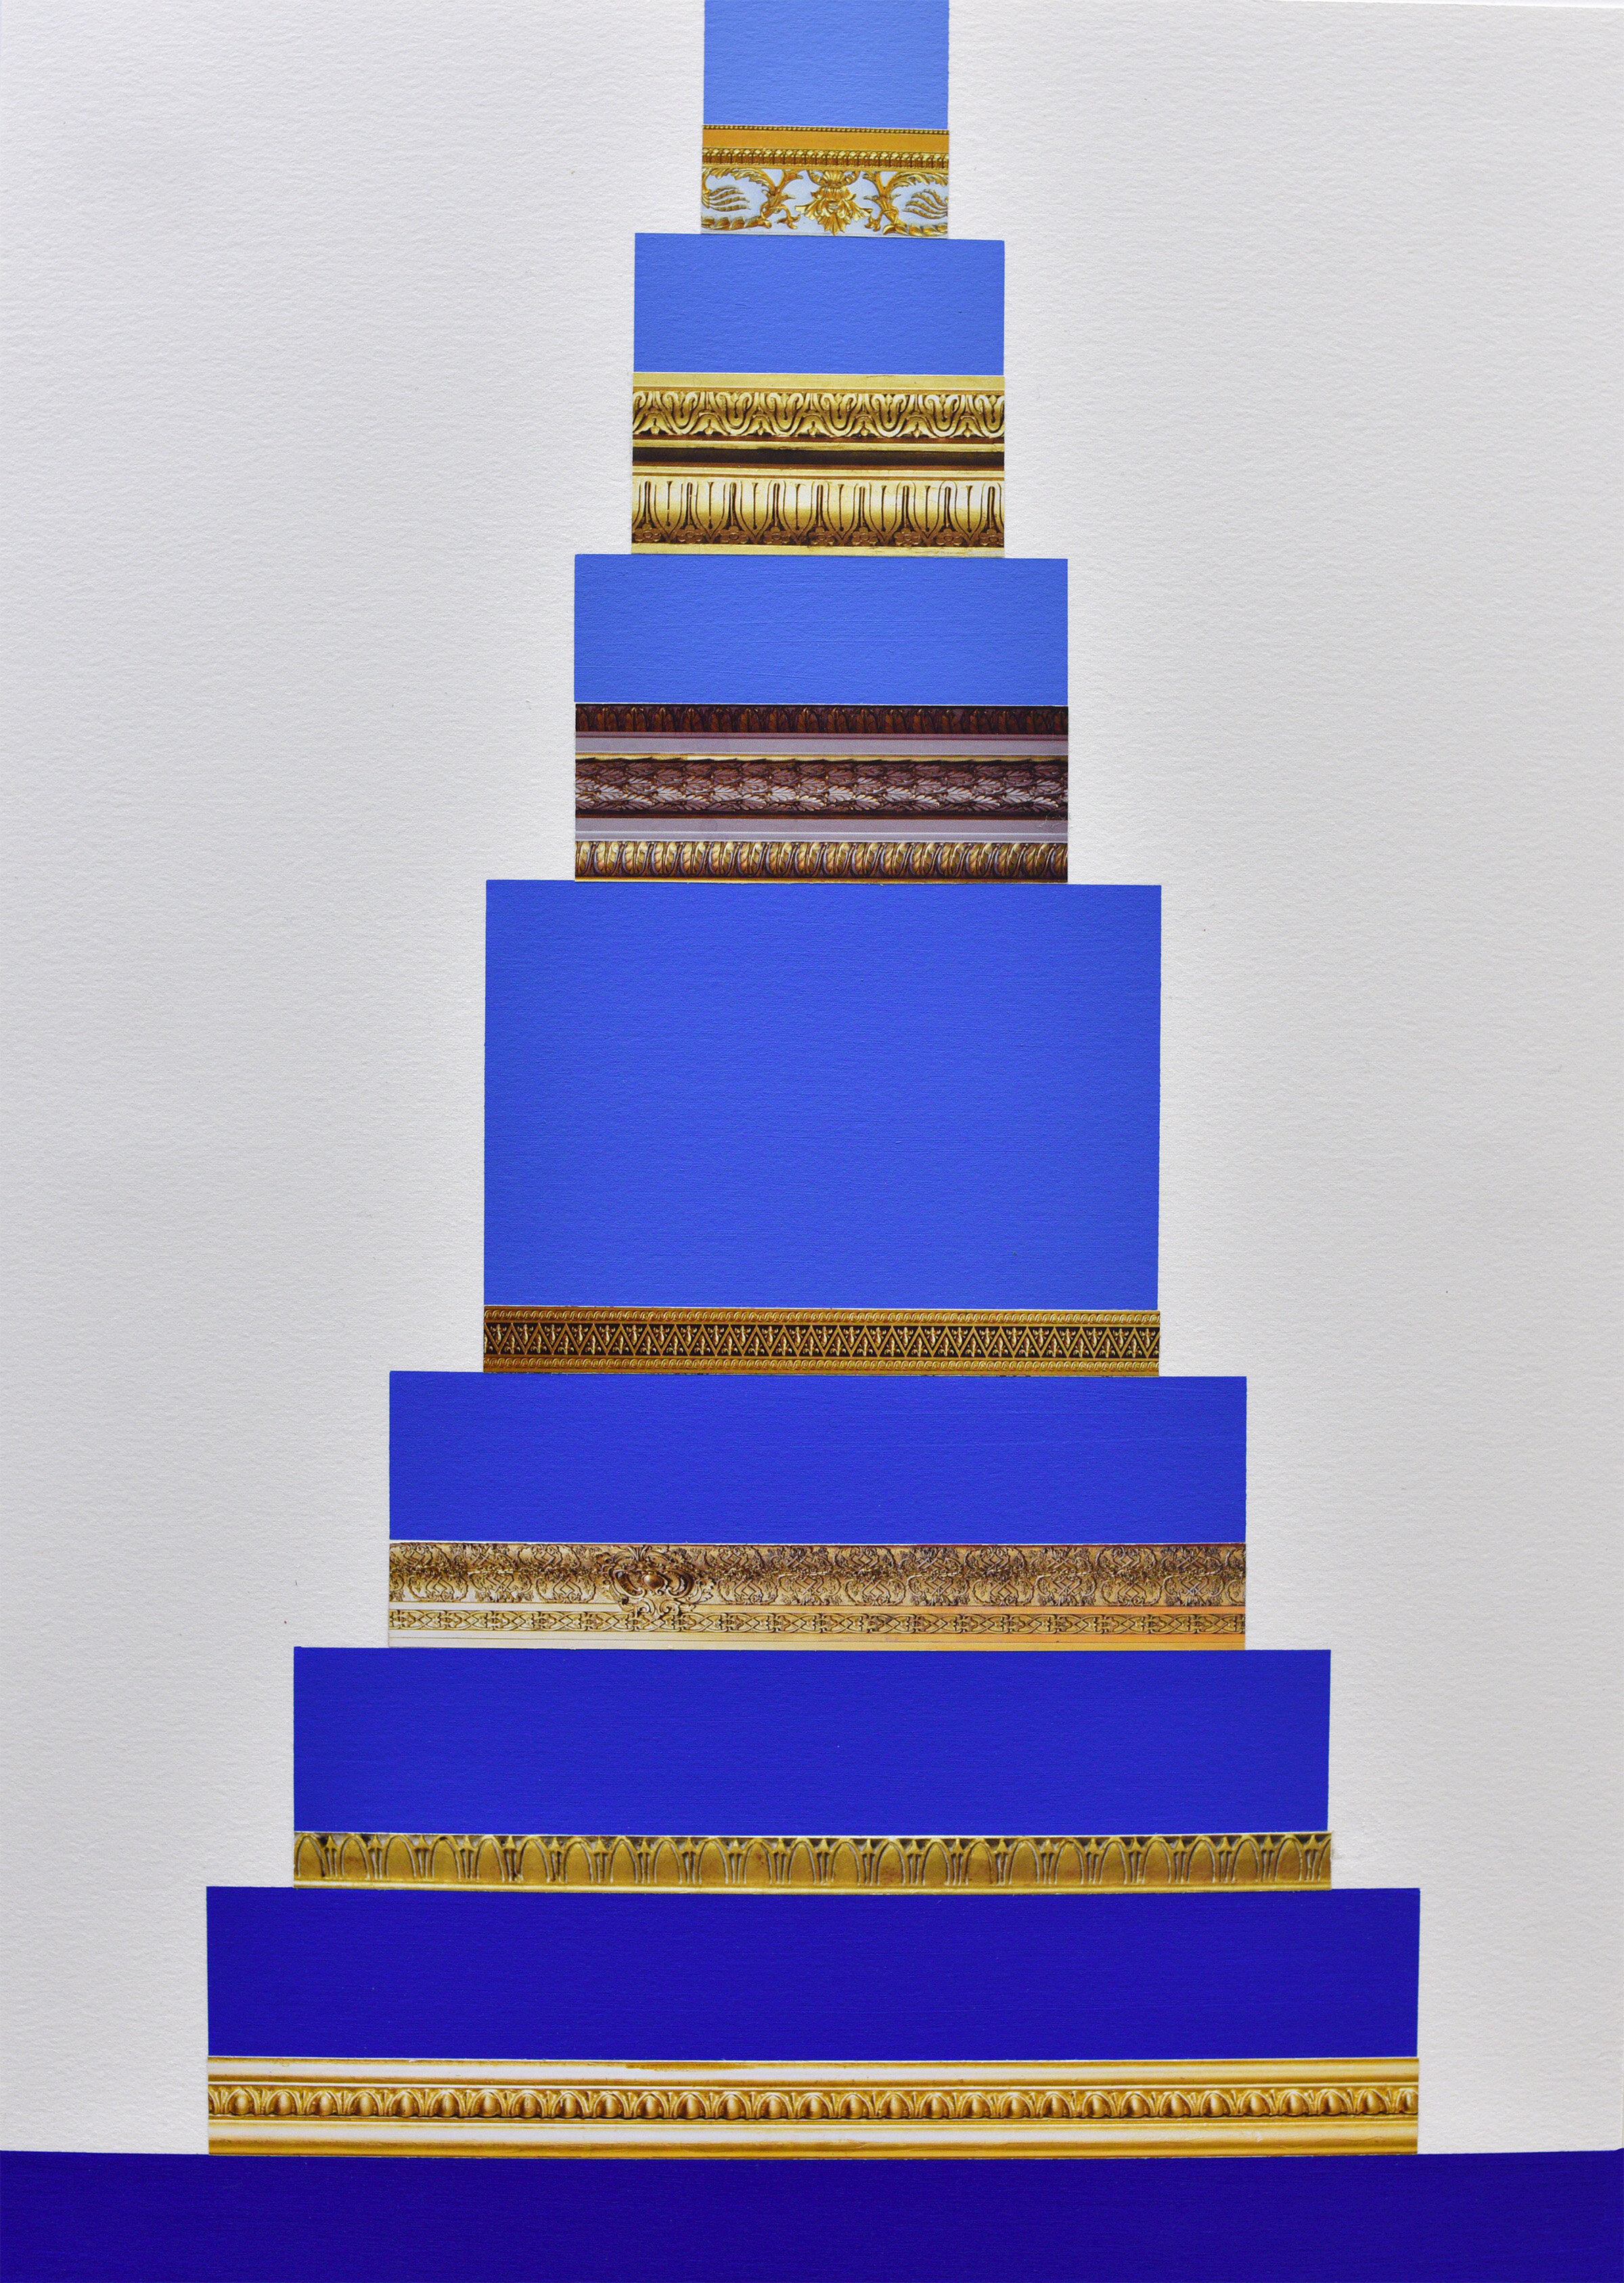 TRIM VOID (BLUE STACK), 19 x 13.5 inches / 48.2 x 34.2 cm, oil stick and collage on paper, 2020